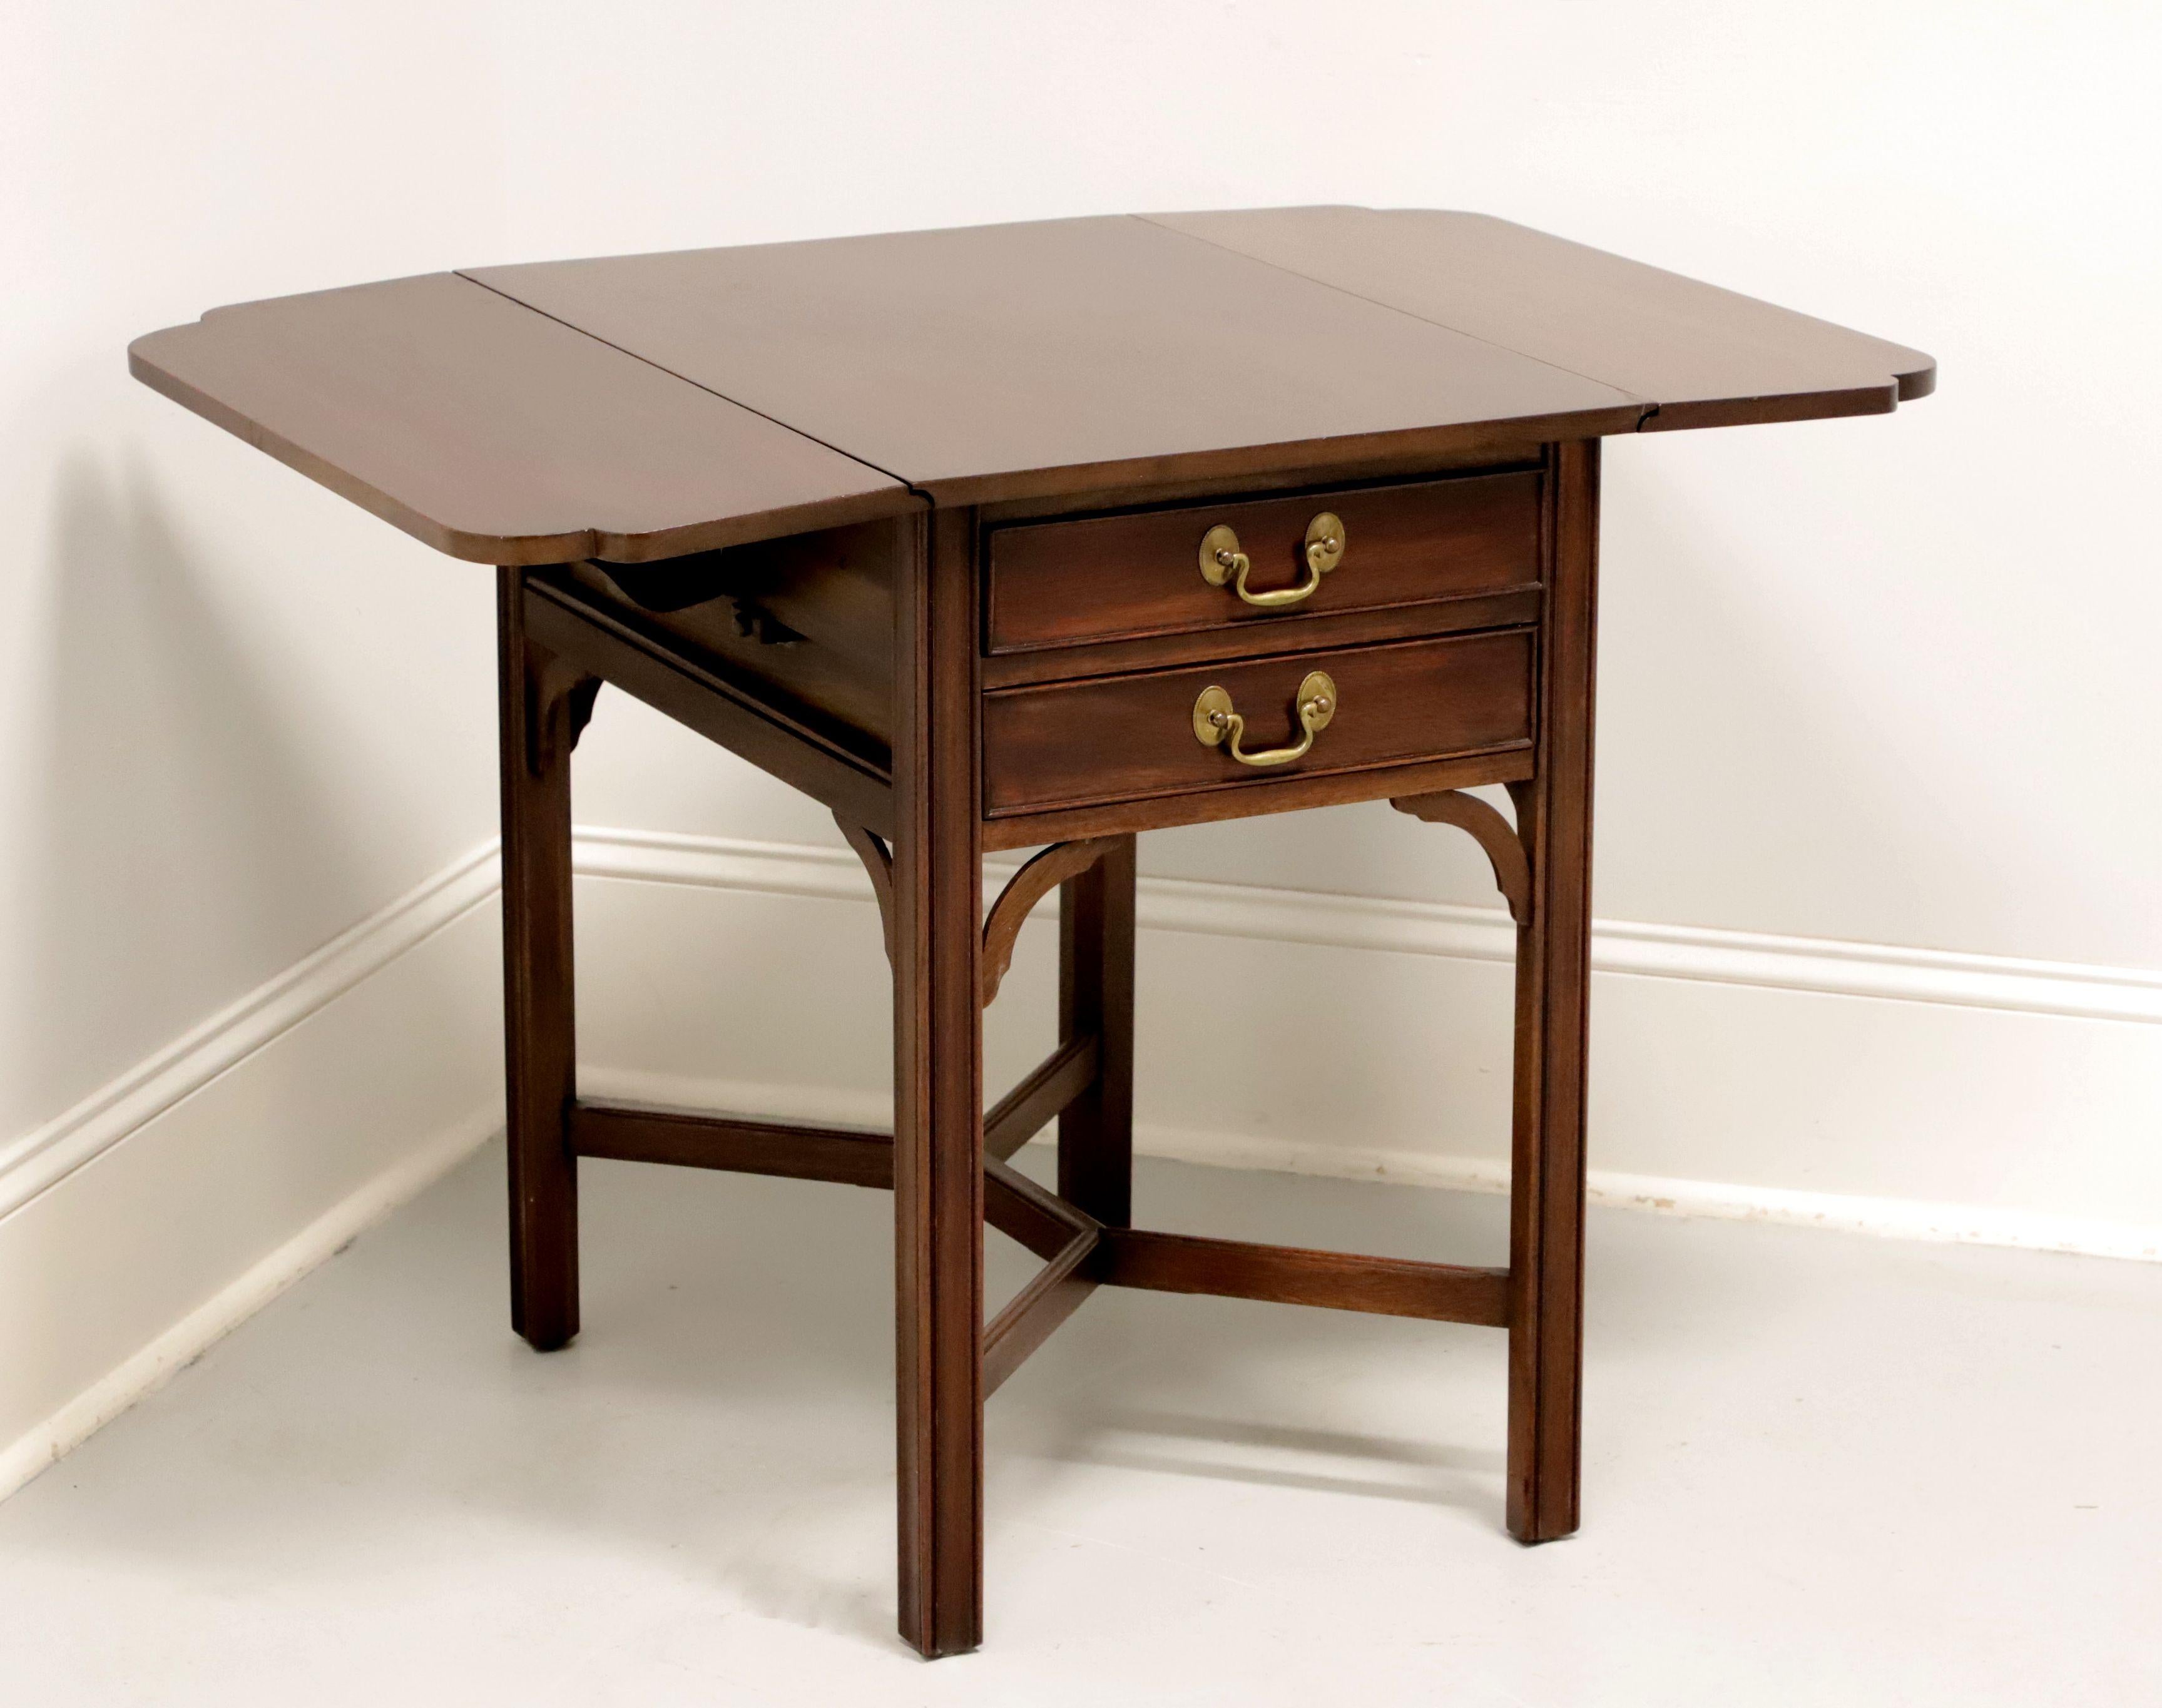 A drop-leaf end table in the Chippendale style by Henkel Harris, of Winchester, Virginia, USA. Solid mahogany with brass hardware, corner brackets, stretcher base with shaped top edge, and straight legs. Features drop leaves with rounded corners and